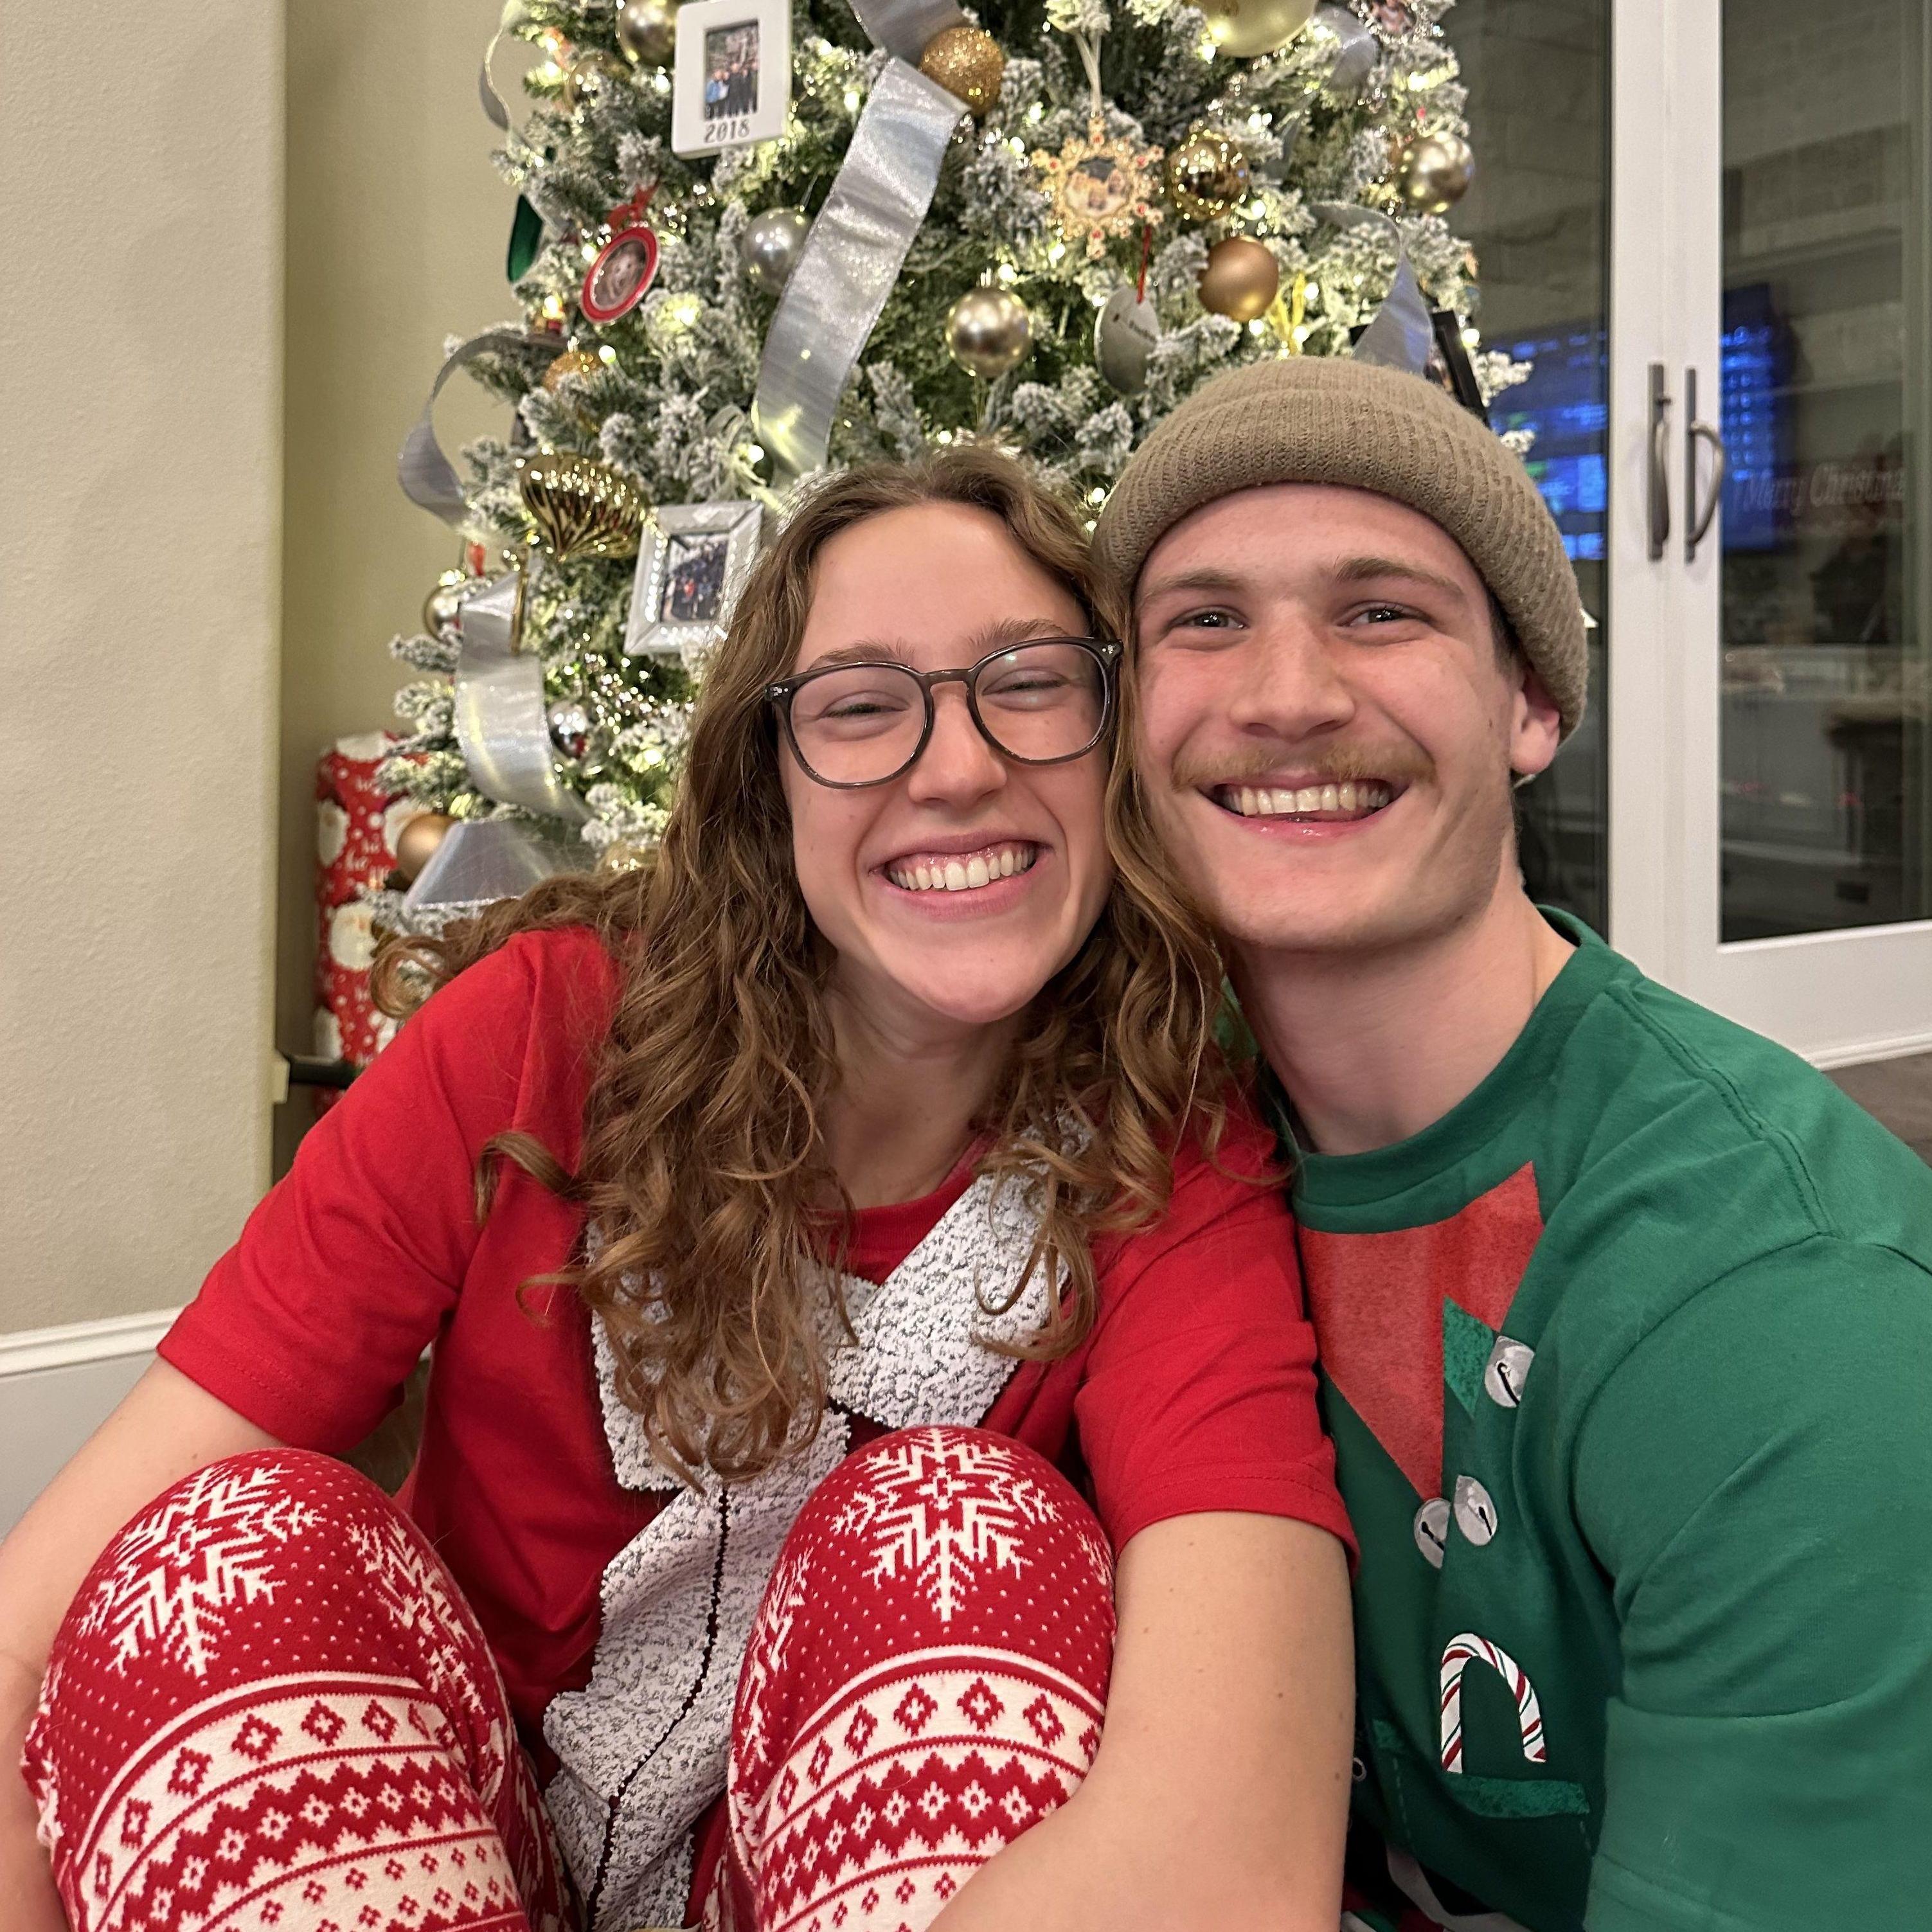 Our first (& only) Christmas engaged!